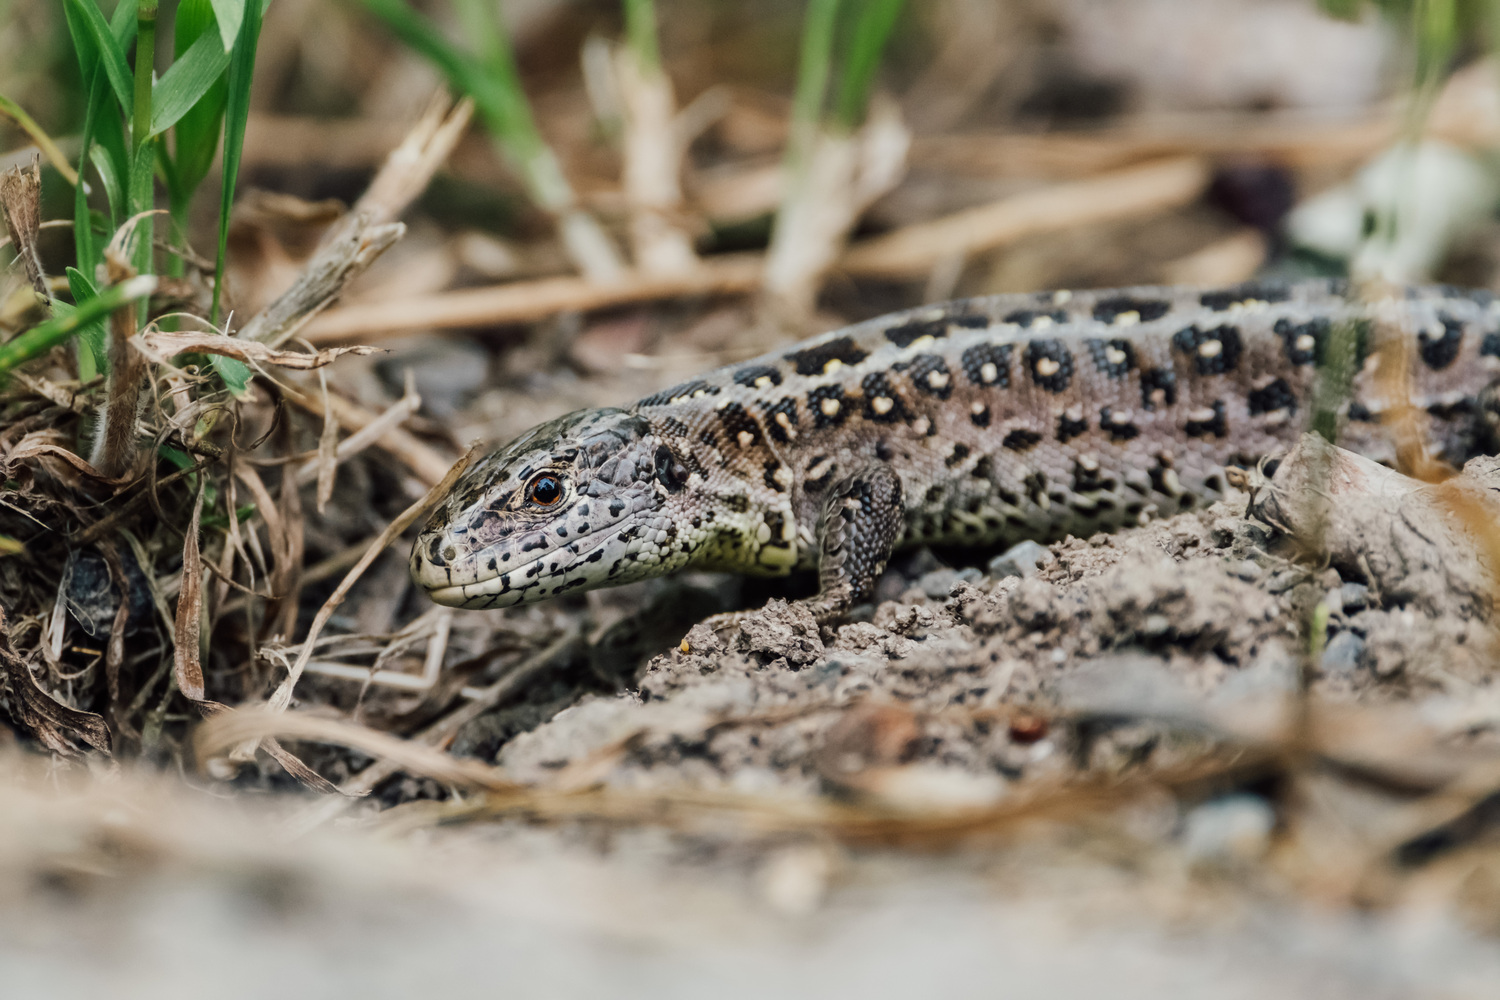 A common lizard sitting on the ground, looking into the camera.